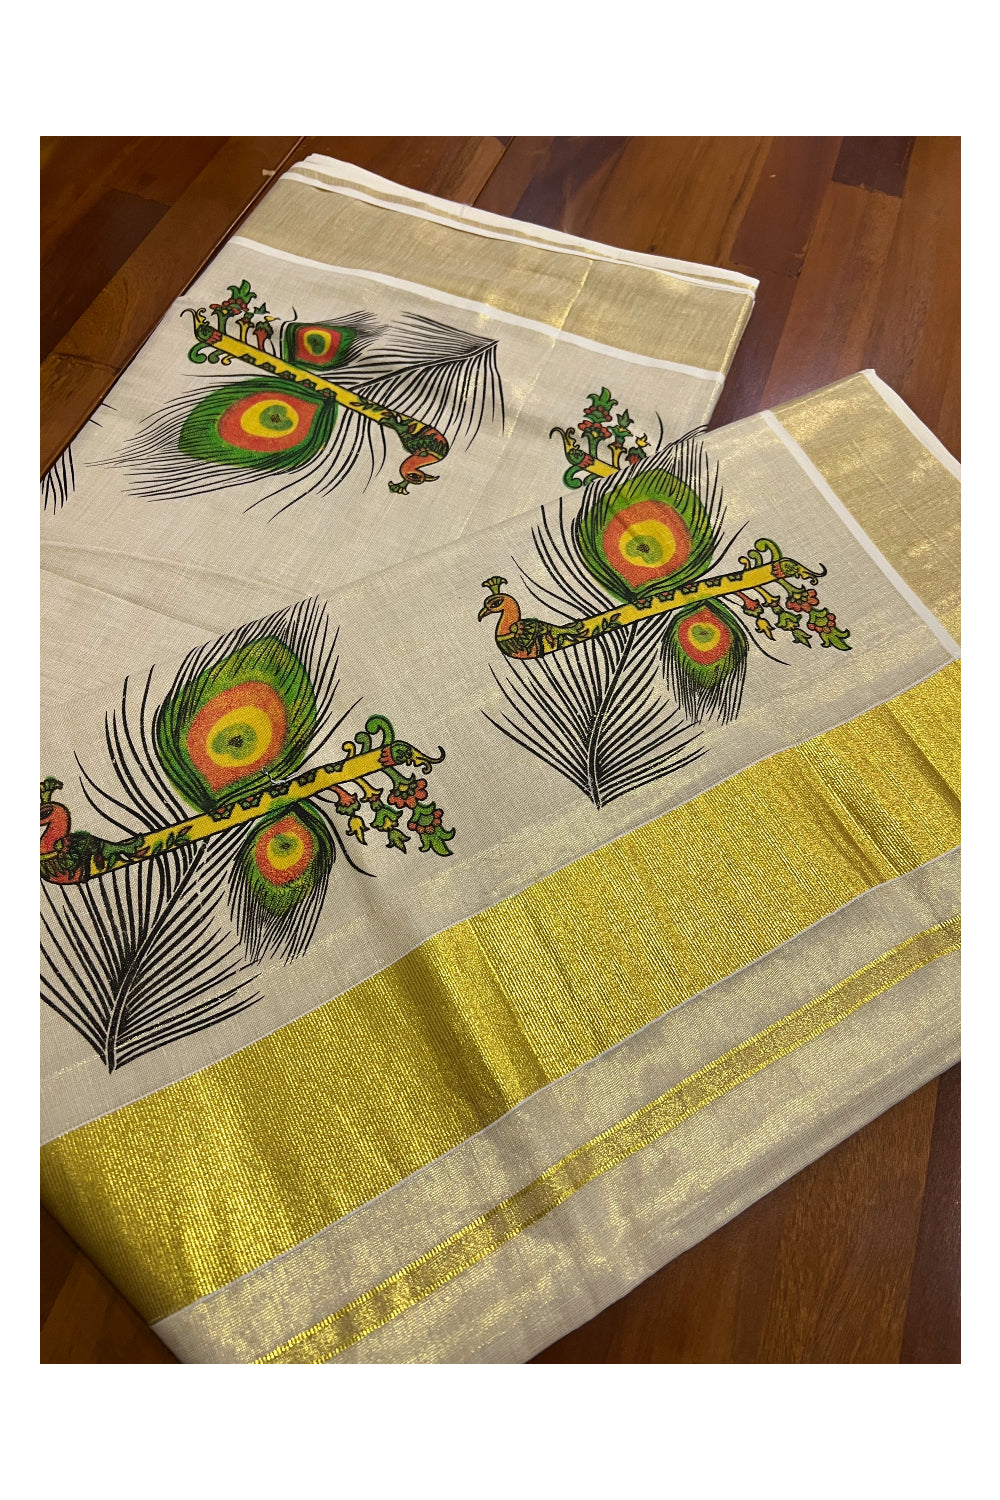 Kerala Tissue Kasavu Saree With Mural Printed Feather and Flute Design